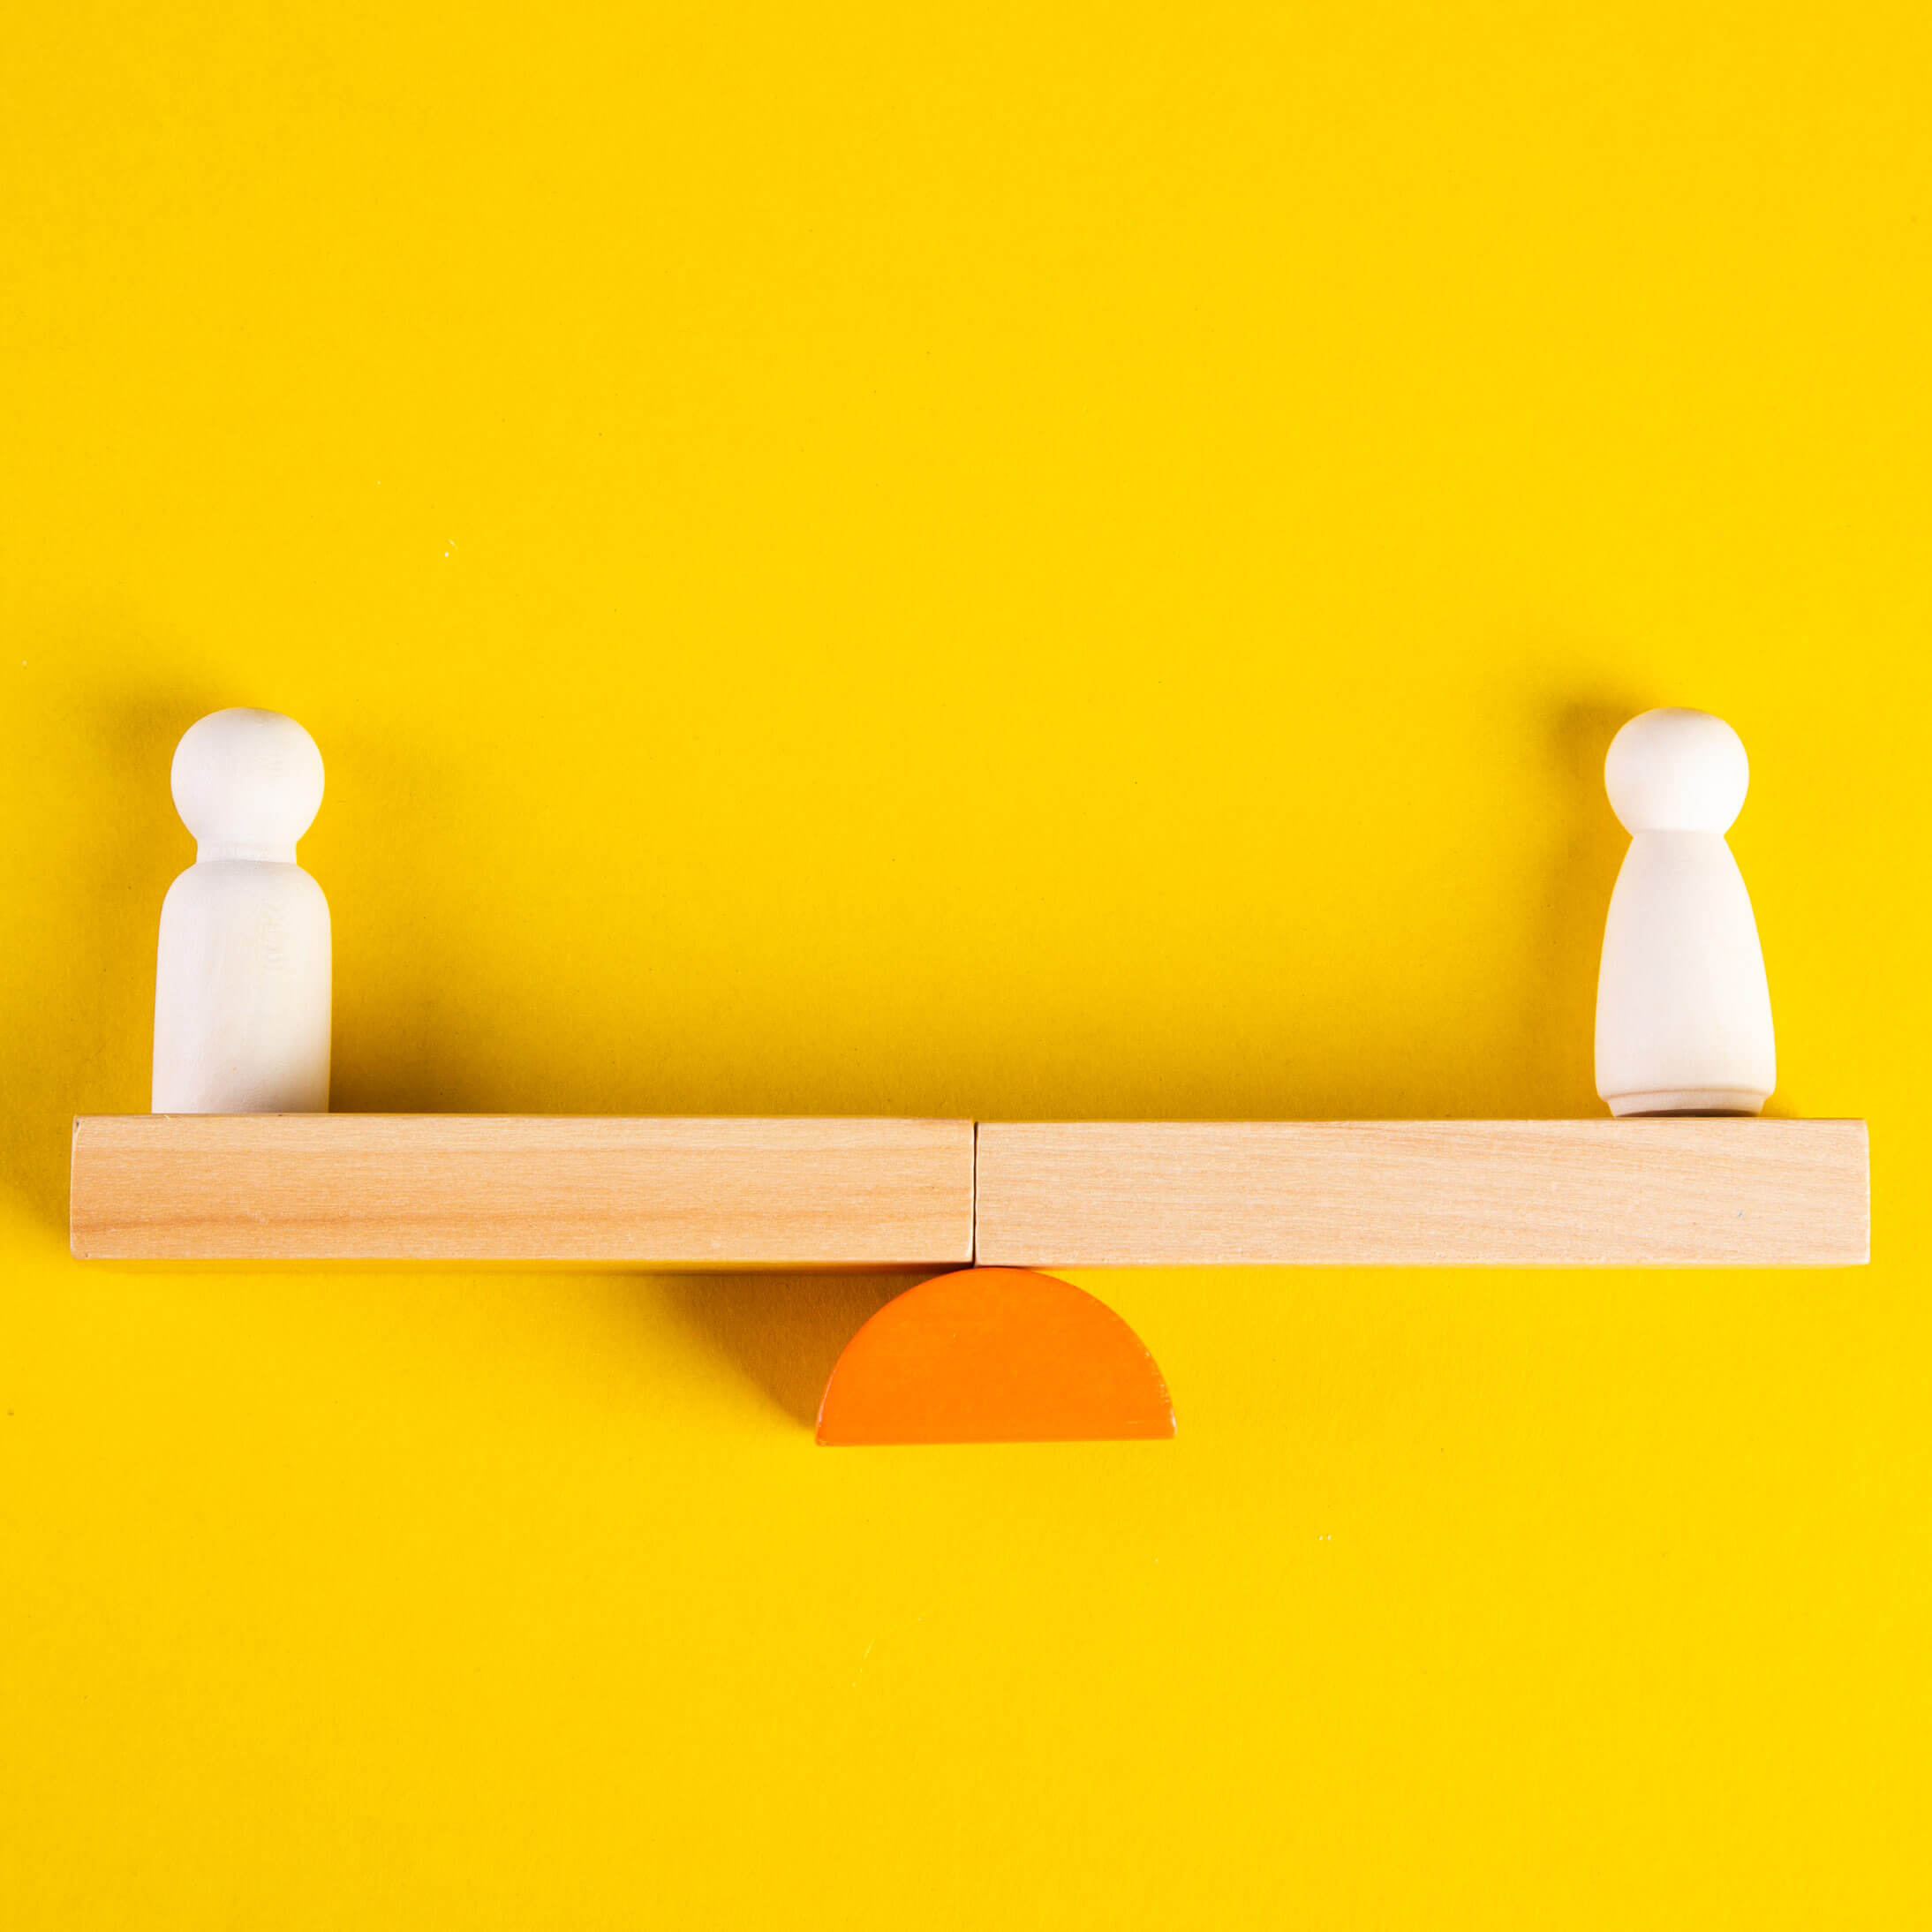 An image of two wooden figures on a wooden seesaw, placed flat on a yellow background. A visual metaphor for the topic of this article: The Worker Protection (Amendment of Equality Act 2010) Bill 2023.